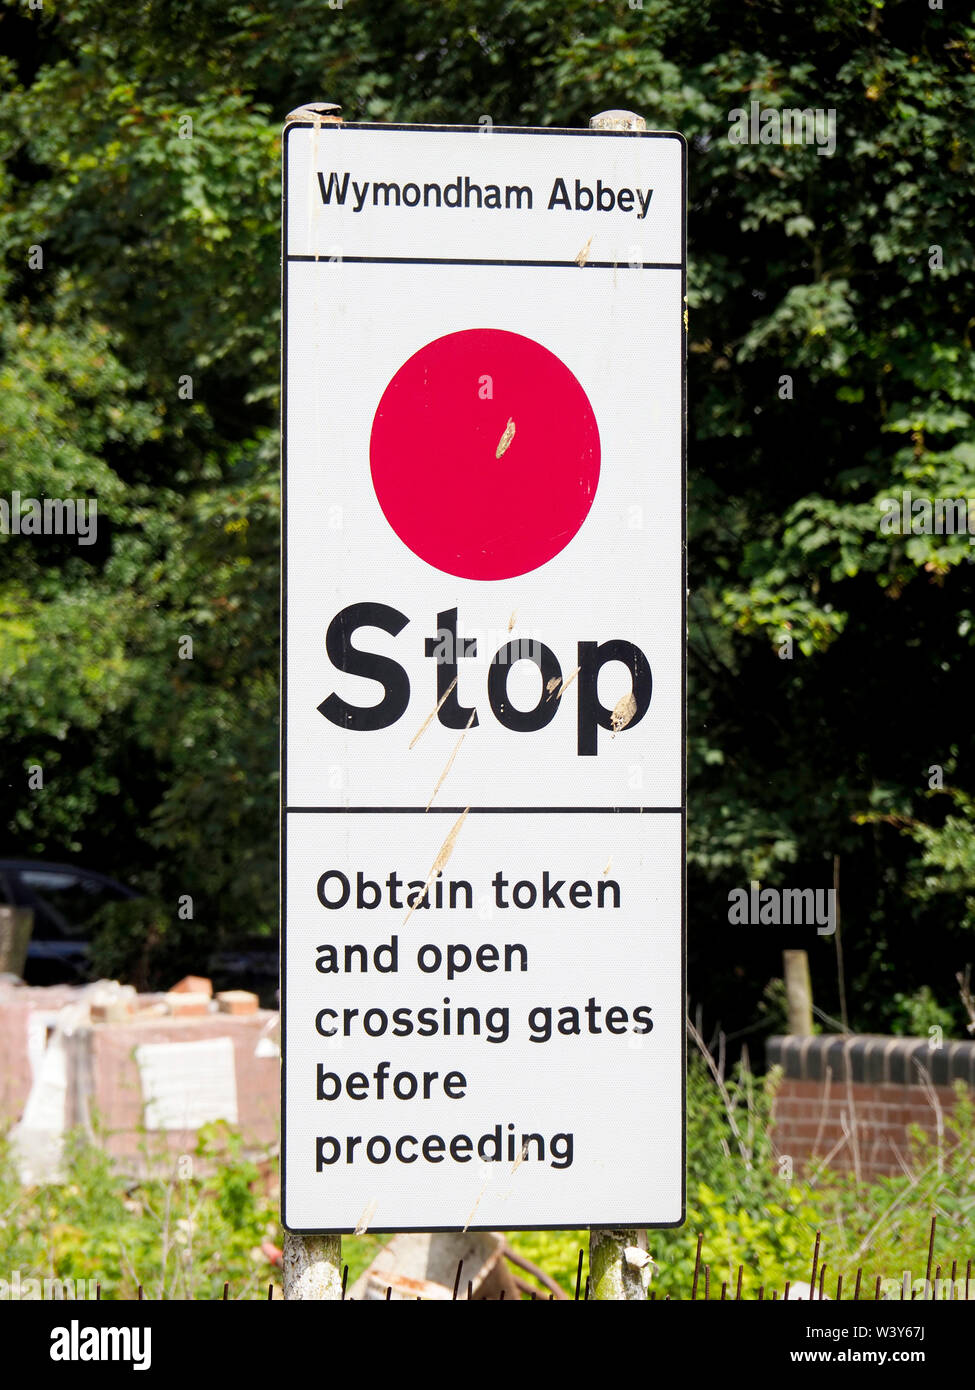 A modern railway safety sign warning trains to stop before proceeding onto the next section of track. Stock Photo